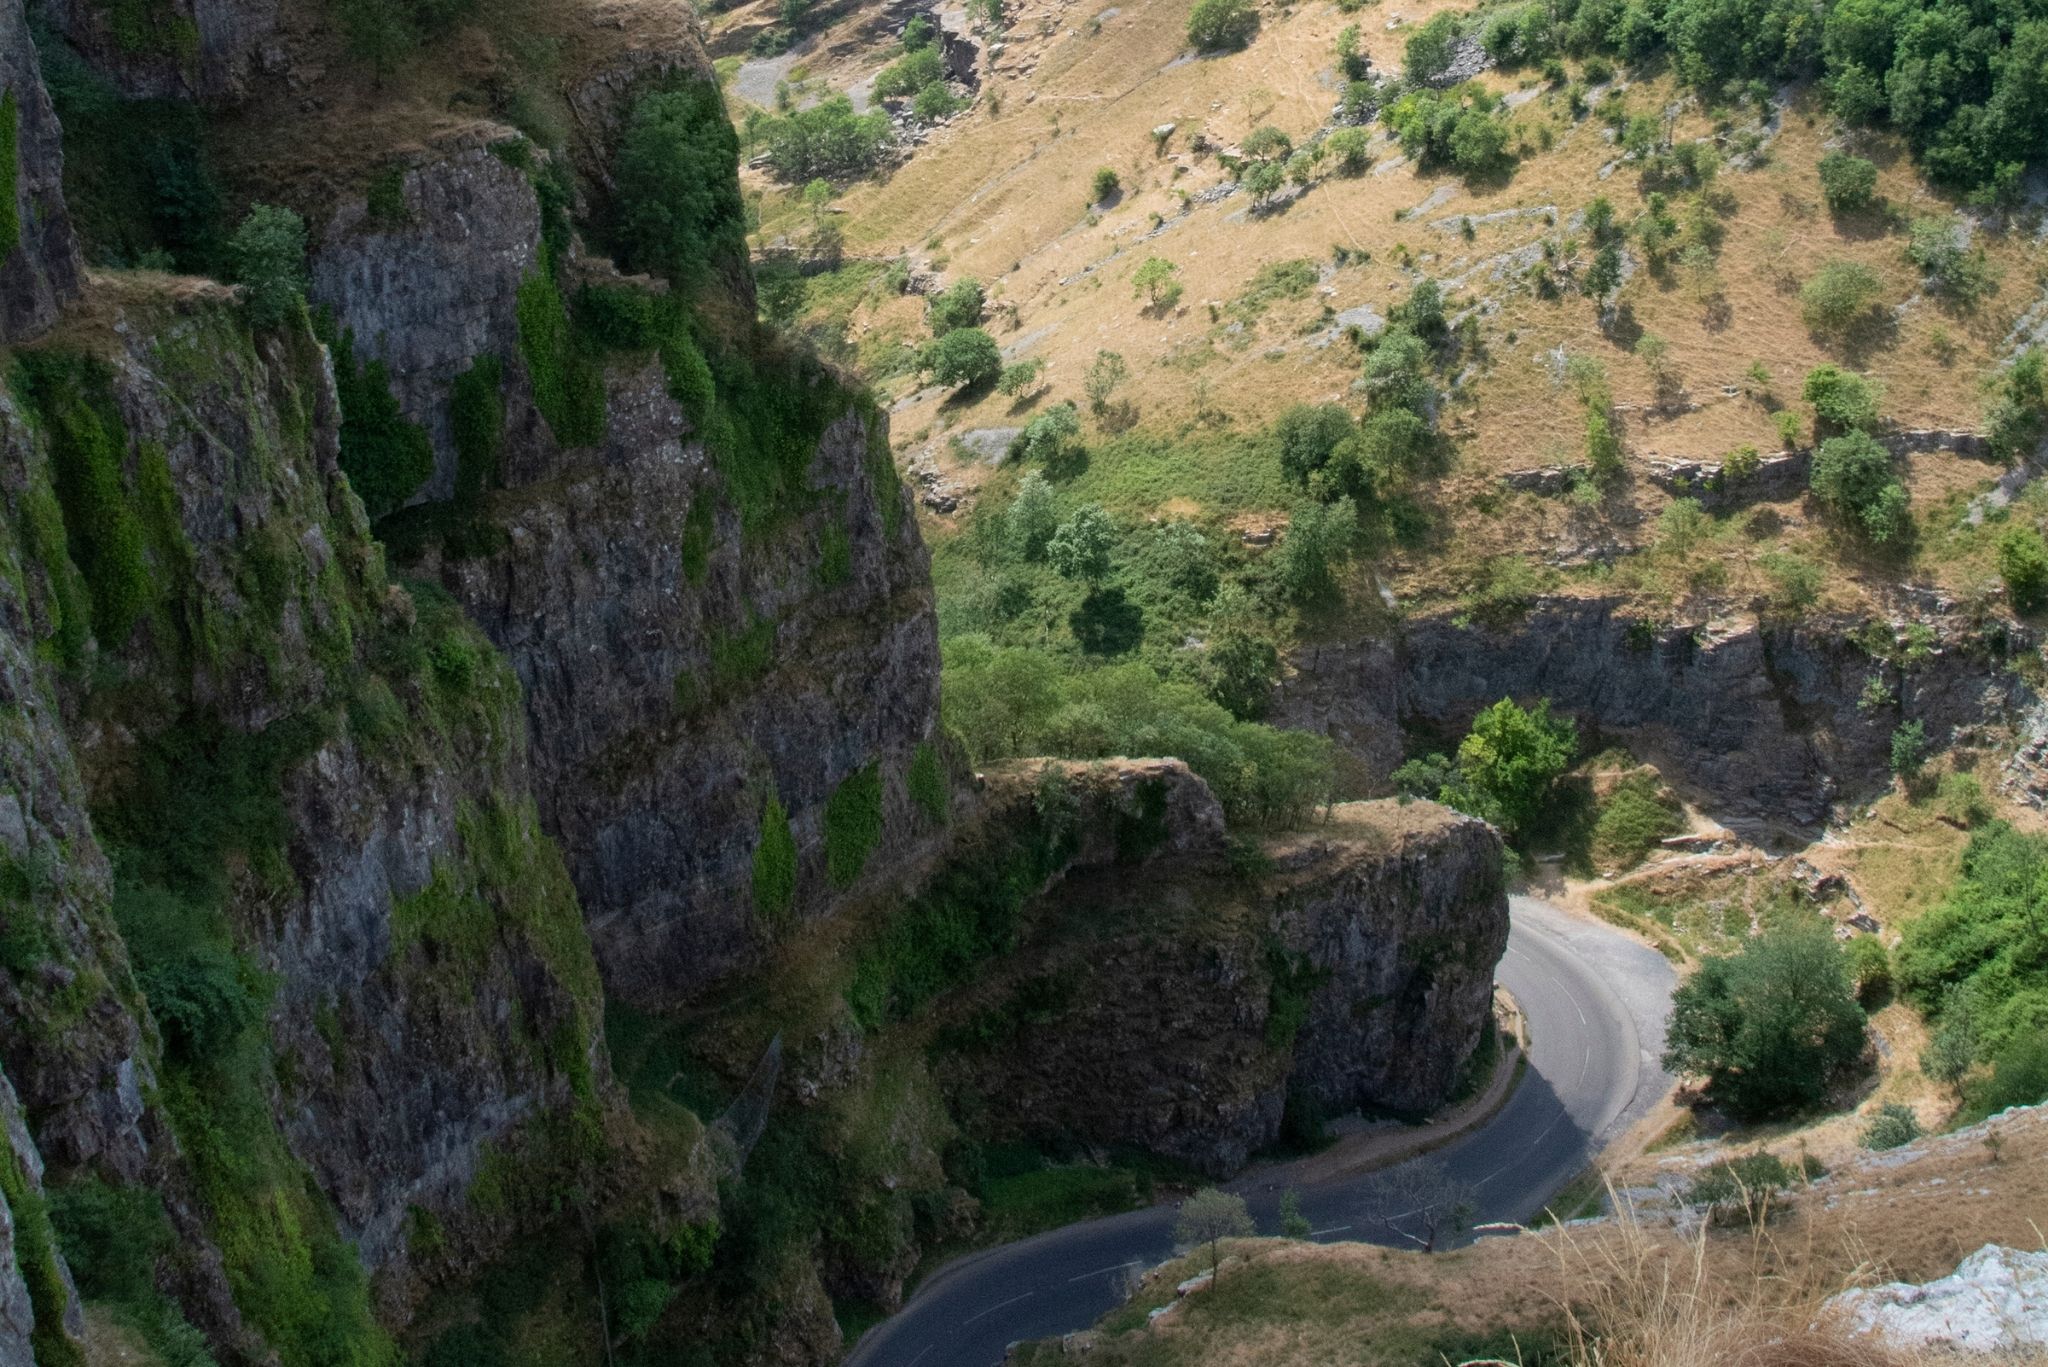 Experience a thrilling day out exploring Cheddar Gorge In Somerset